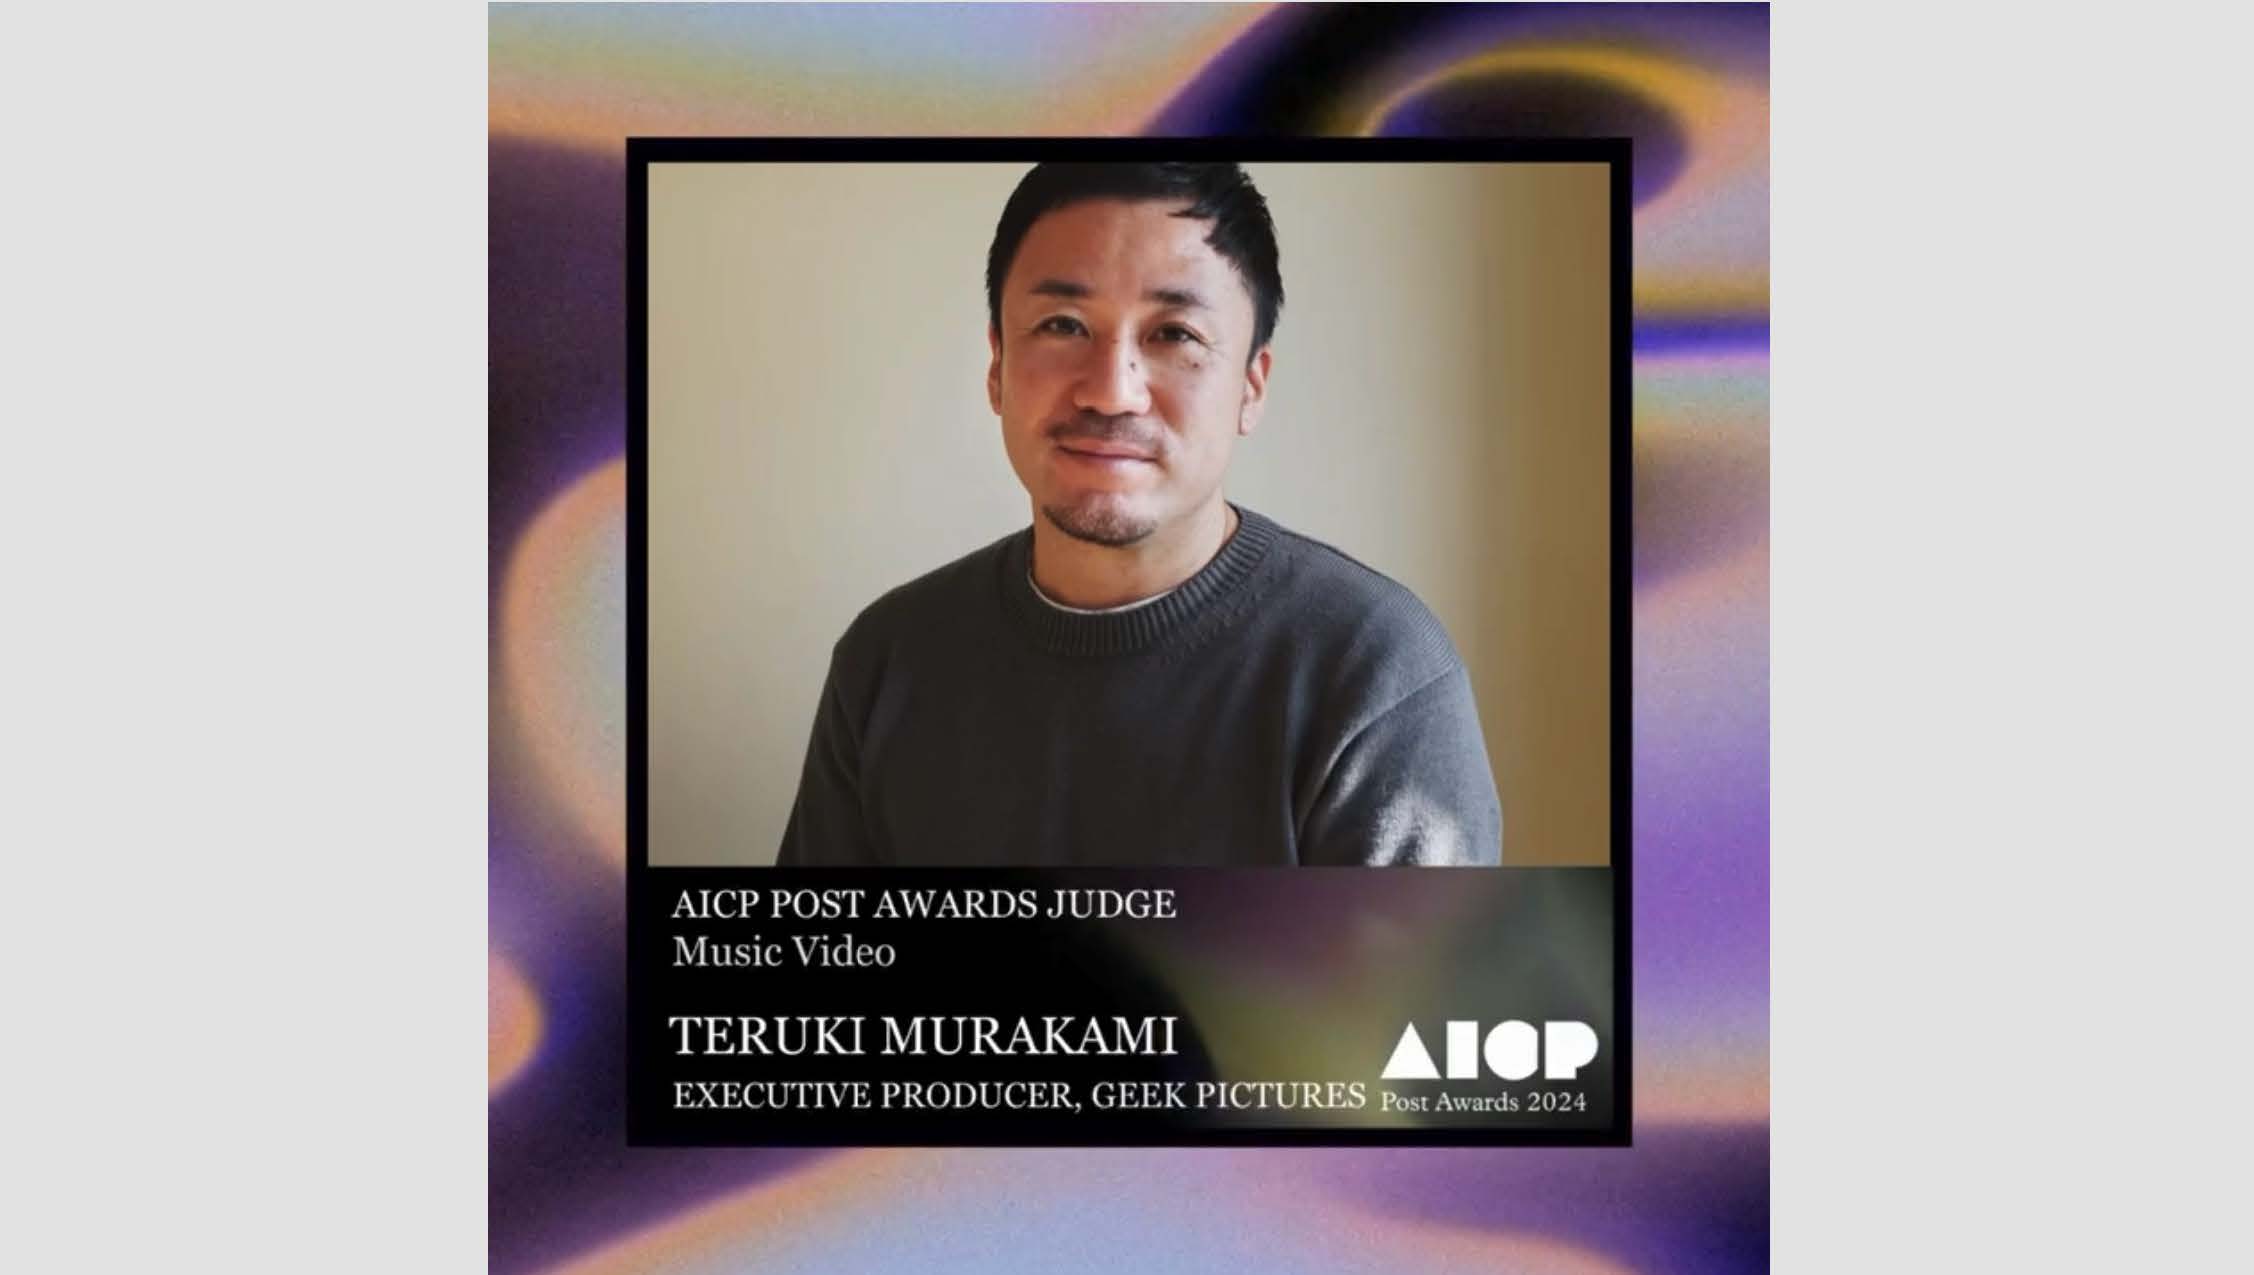 Producer Teruki Murakami was selected as judge for the “AICP Post Awards, Music Video Category”